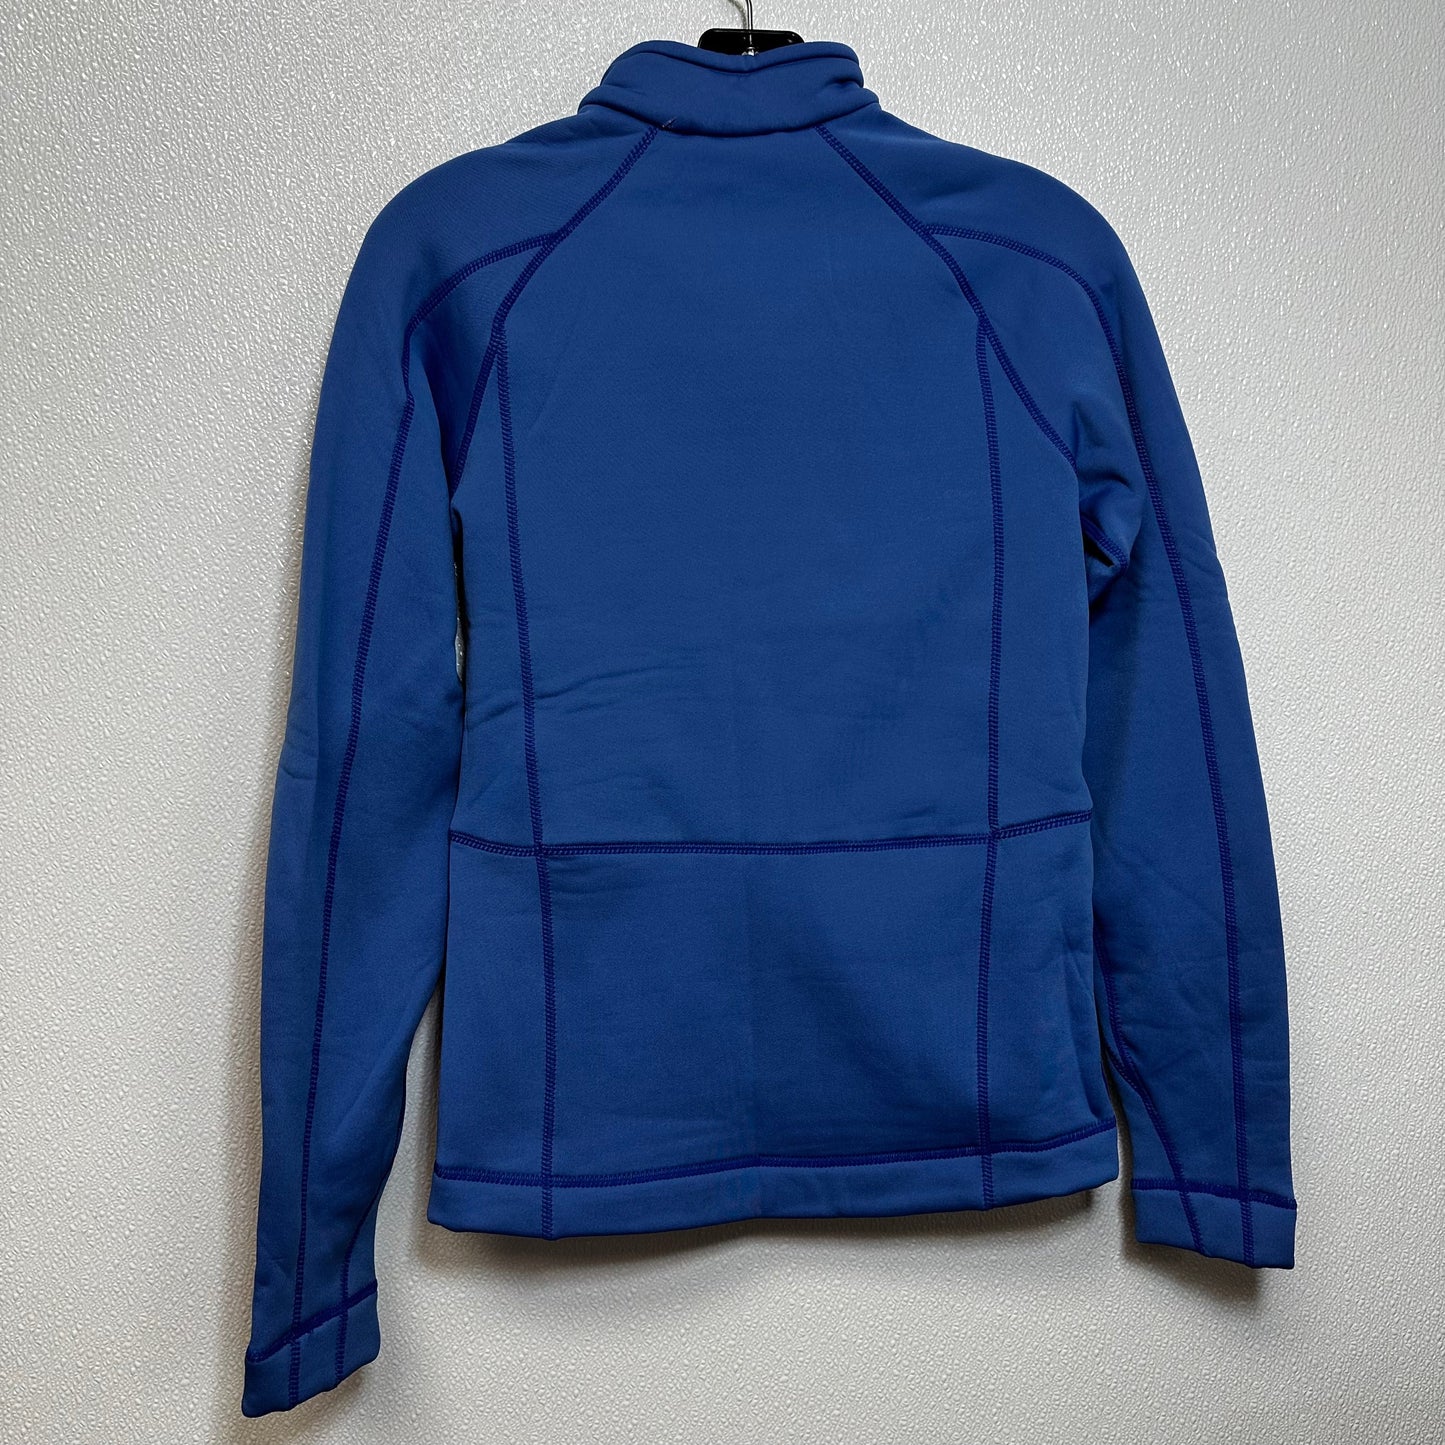 Blue Athletic Top Long Sleeve Collar Avalanche, Size S